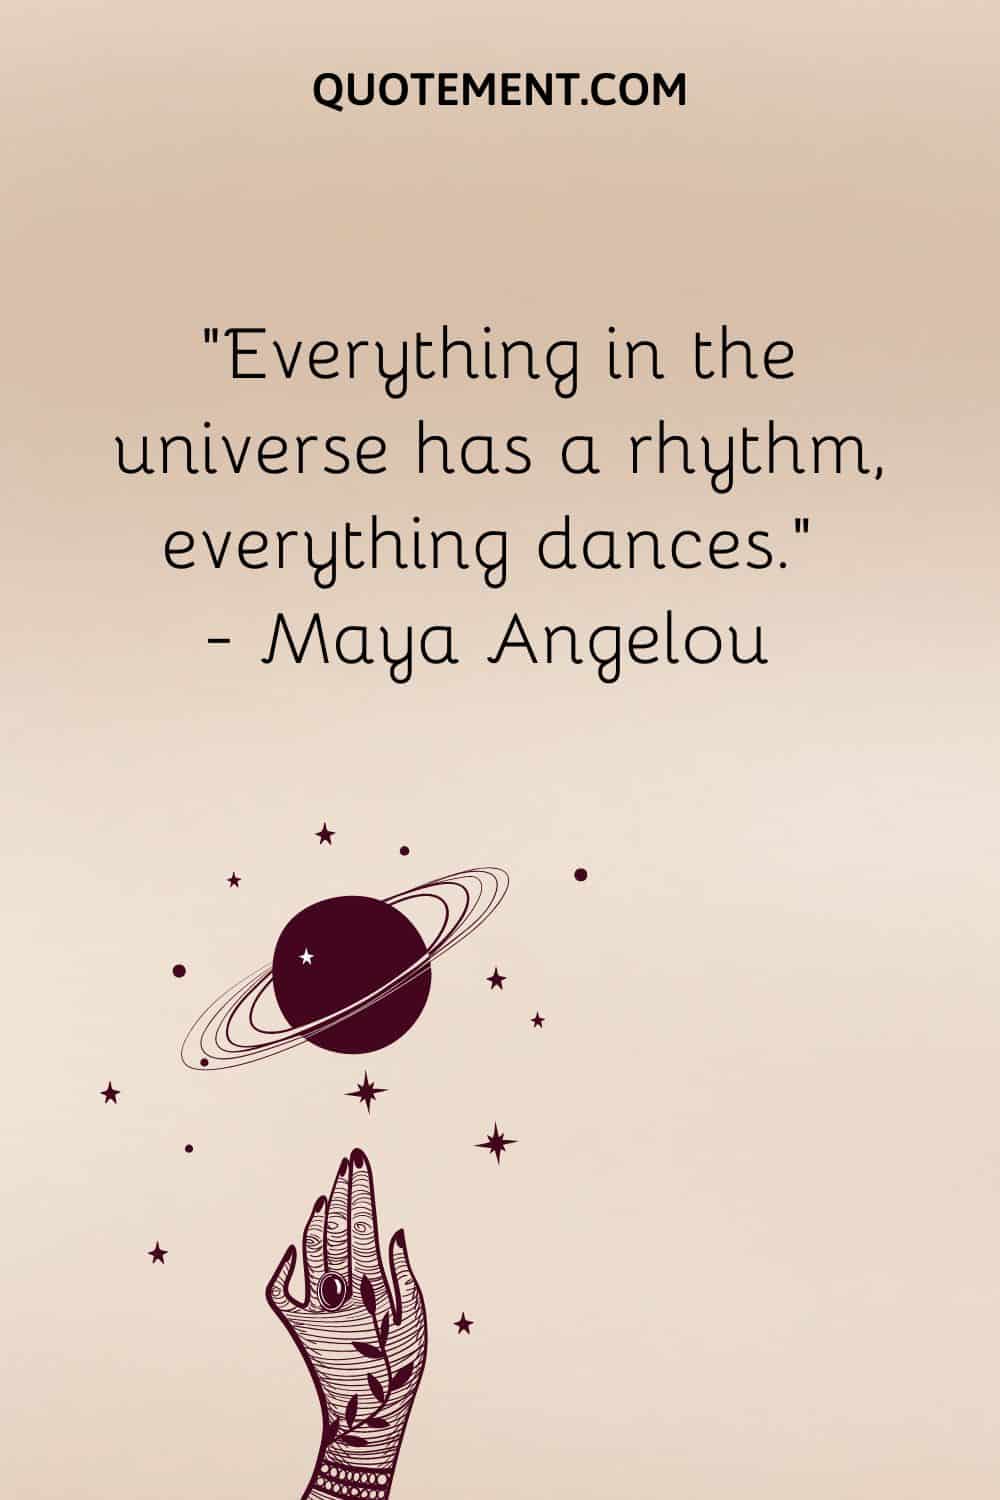 Everything in the universe has a rhythm, everything dances